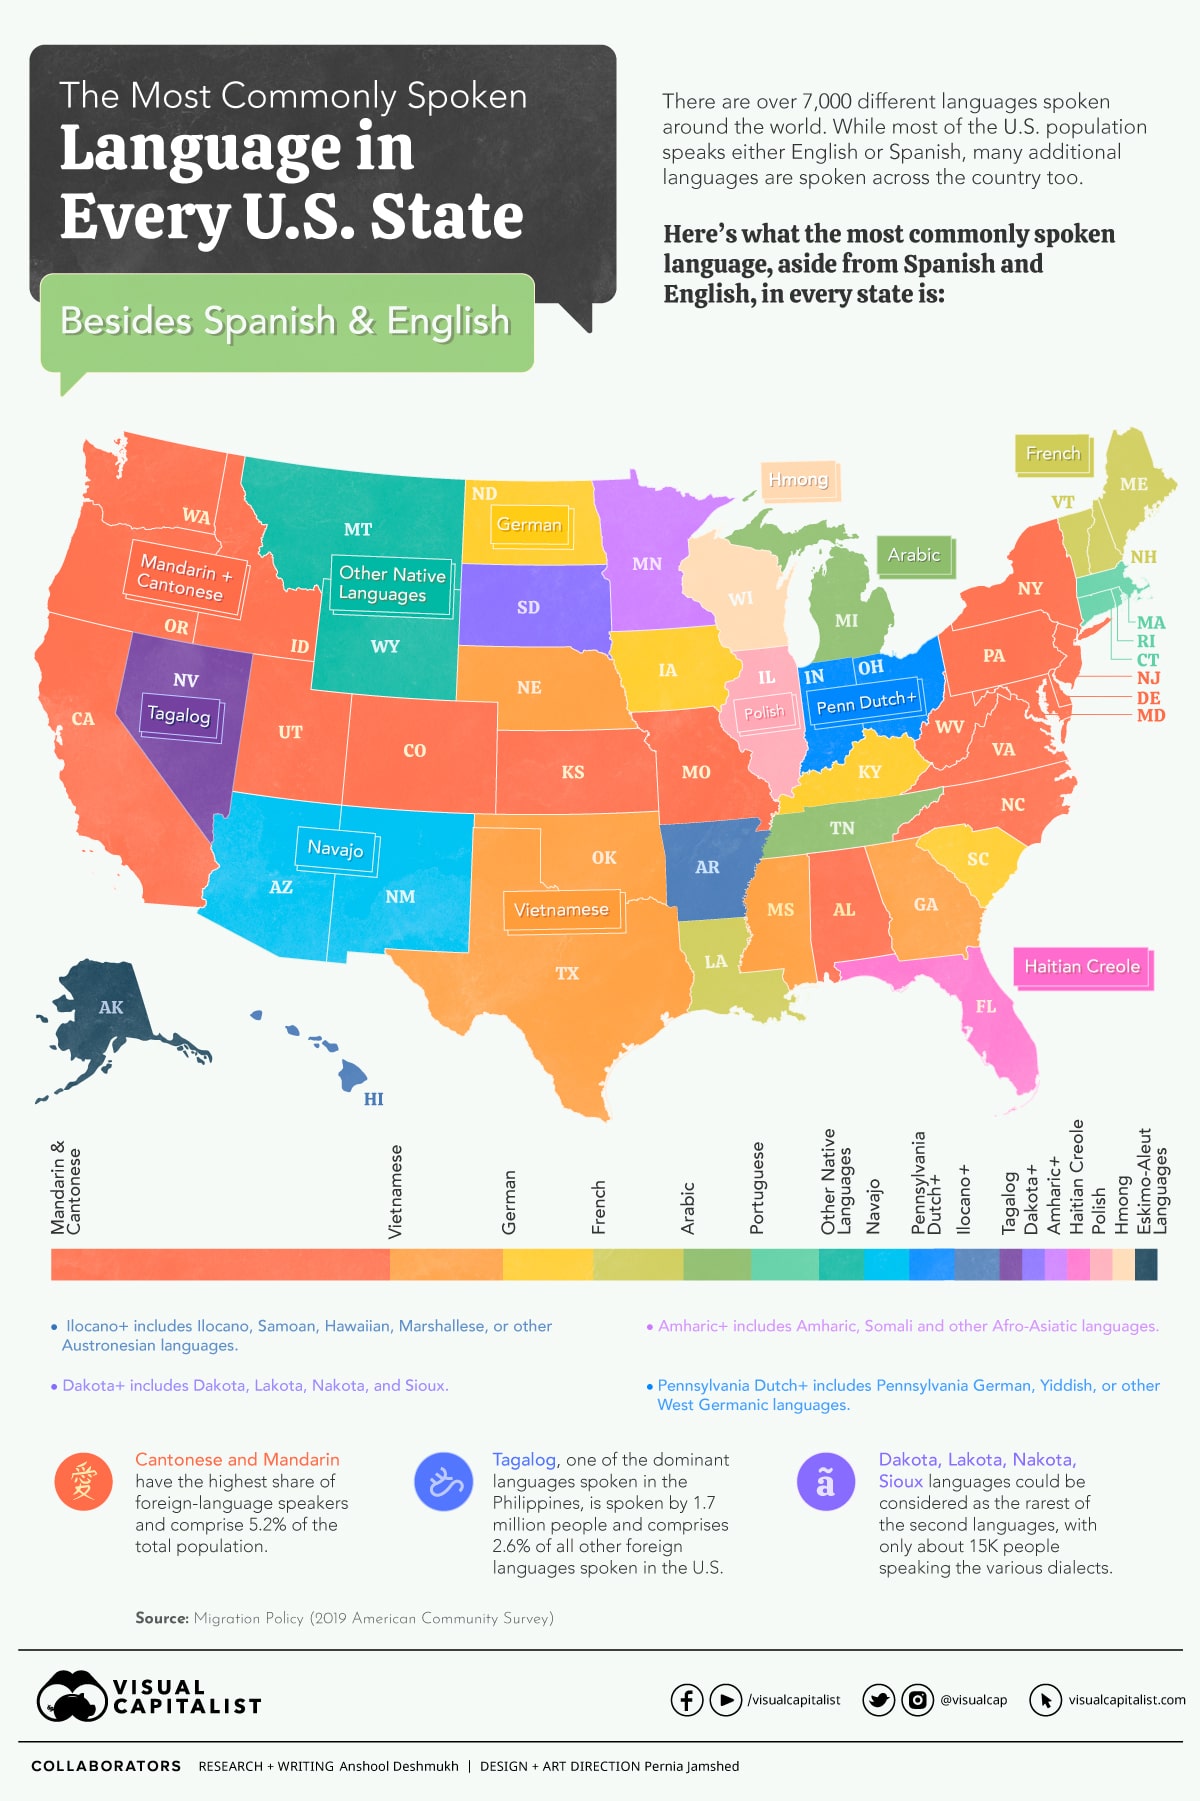 The most commonly spoken language in every US state